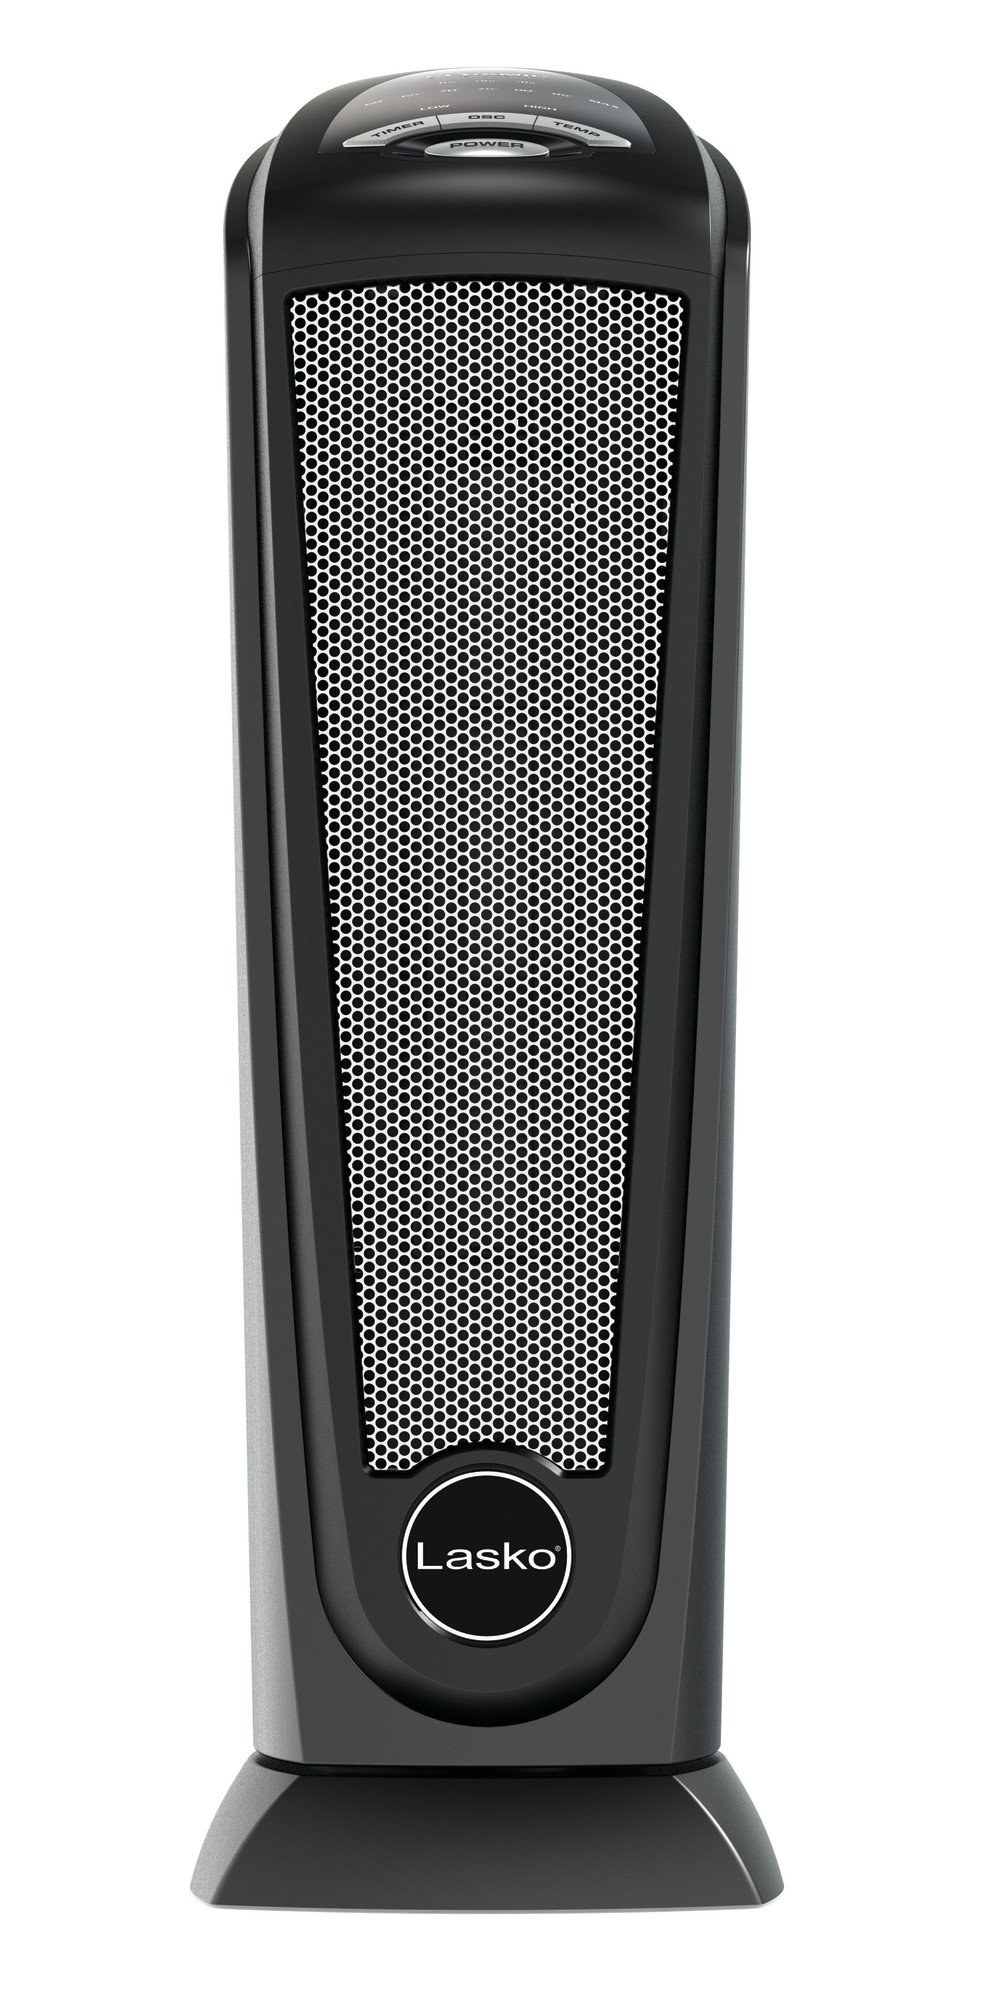 Lasko 22.5" 1500W Oscillating Ceramic Tower Space Heater with Remote, Black, CT22410, New - image 2 of 7